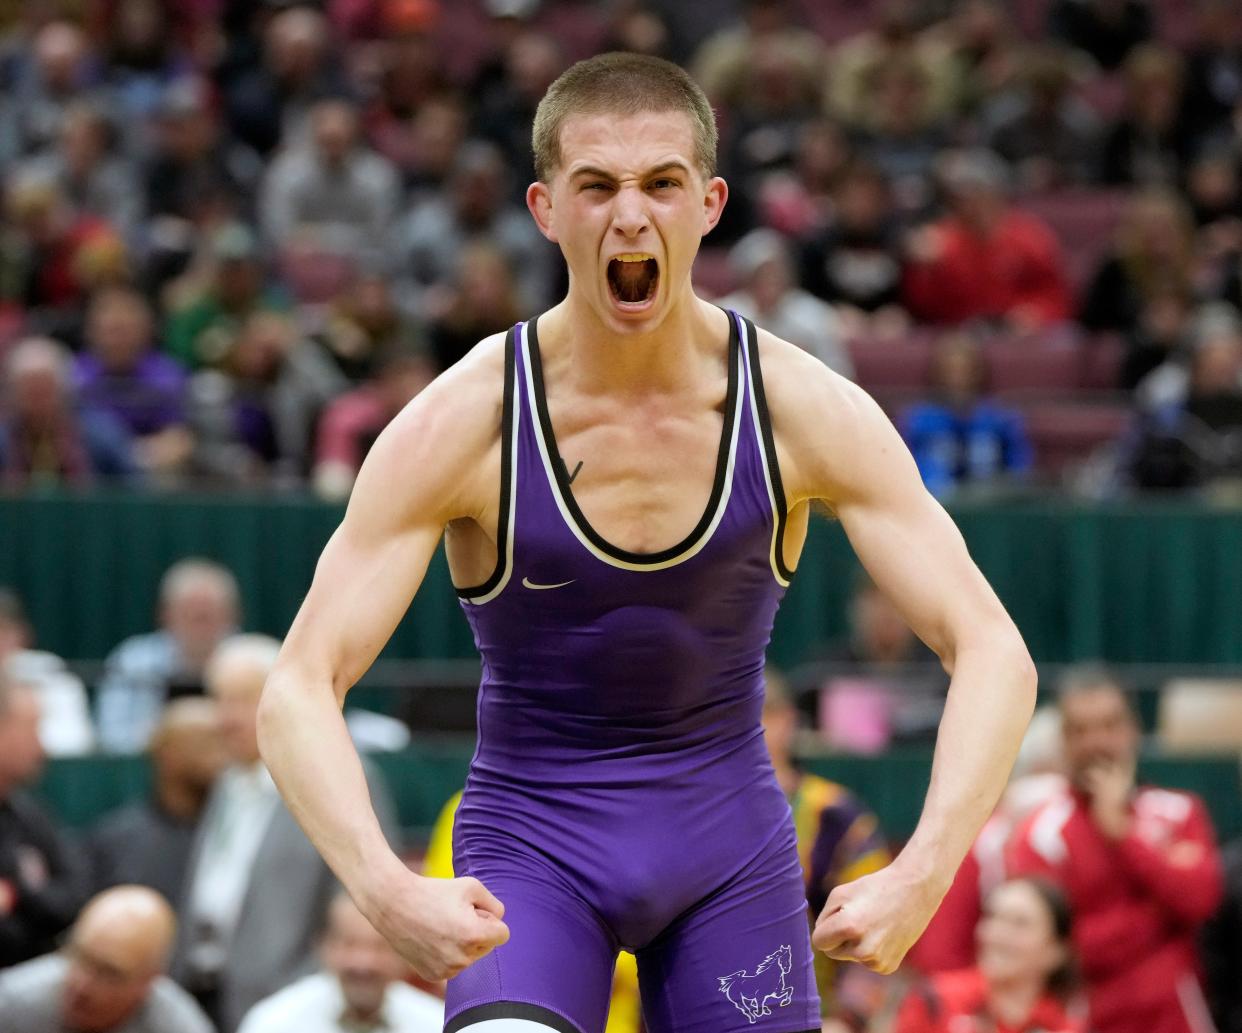 11. DeSales' David McClelland was one of 10 central Ohio wrestlers to win state championships.